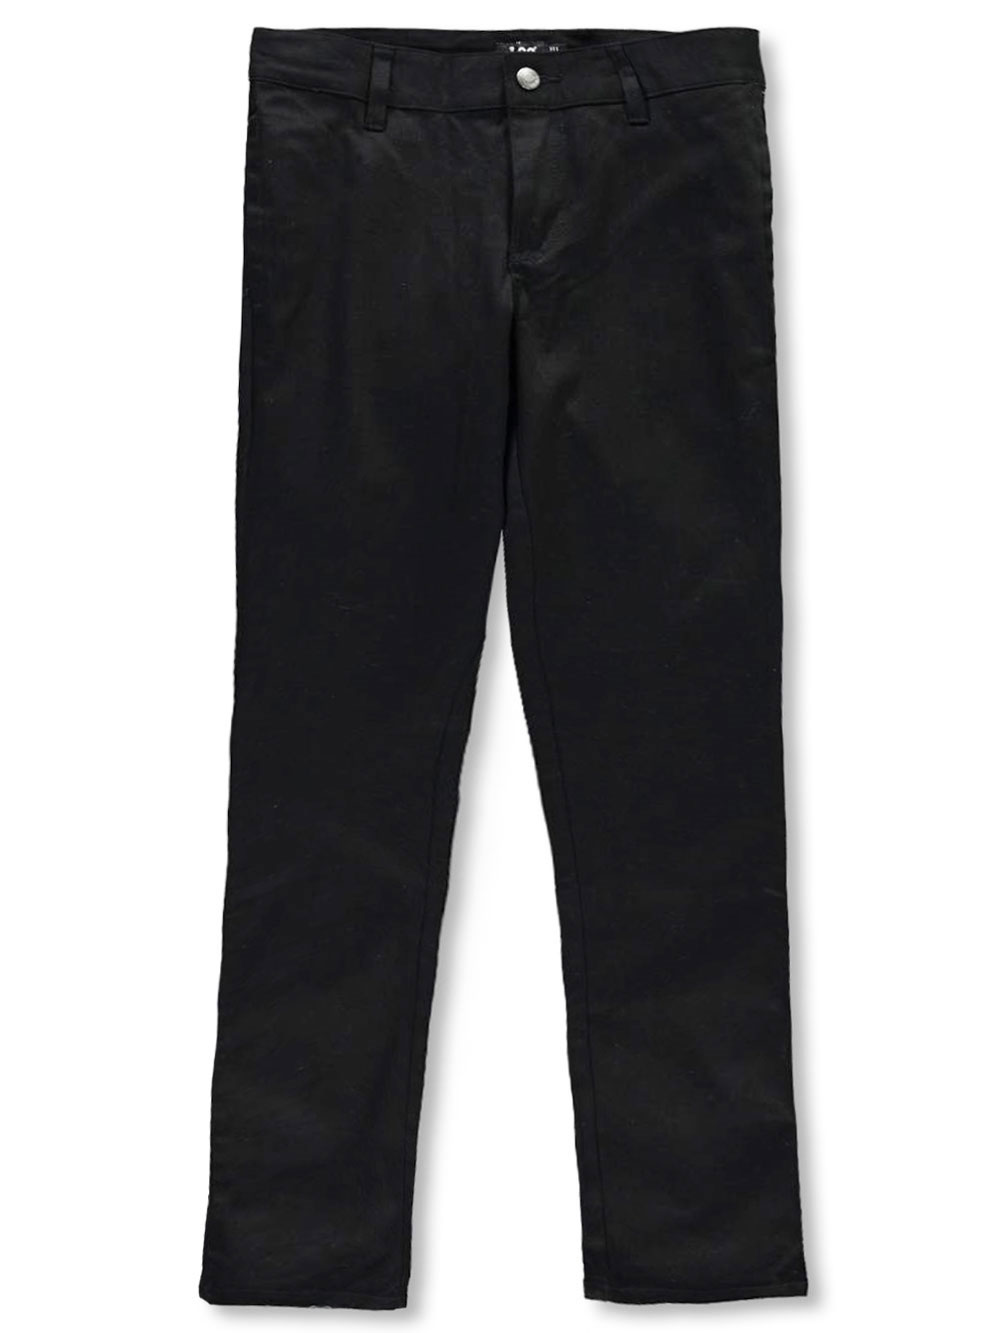 Size Junior 15 Pants for Girls